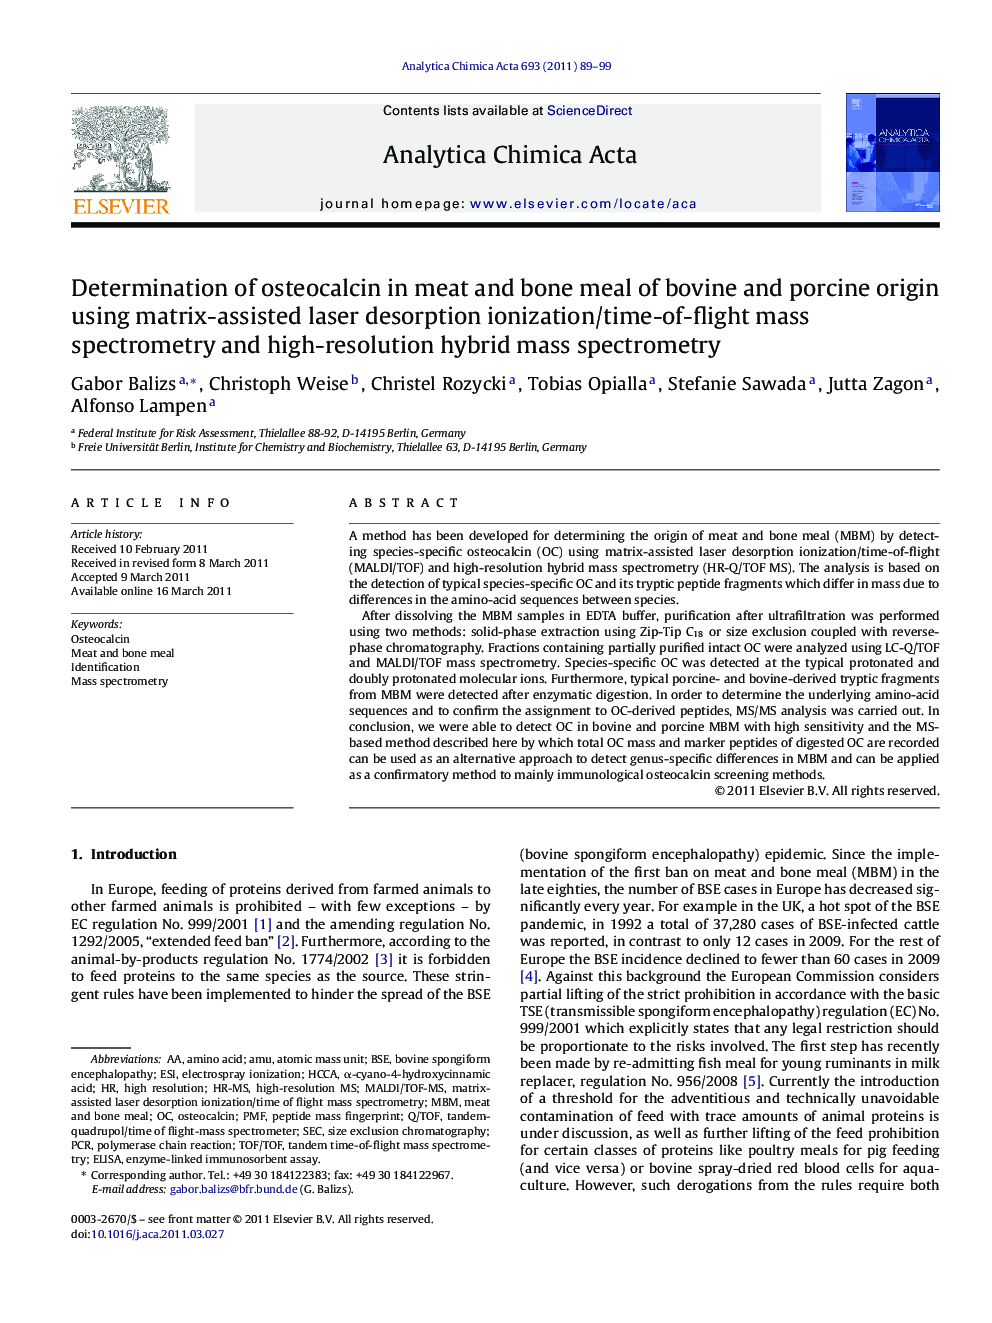 Determination of osteocalcin in meat and bone meal of bovine and porcine origin using matrix-assisted laser desorption ionization/time-of-flight mass spectrometry and high-resolution hybrid mass spectrometry